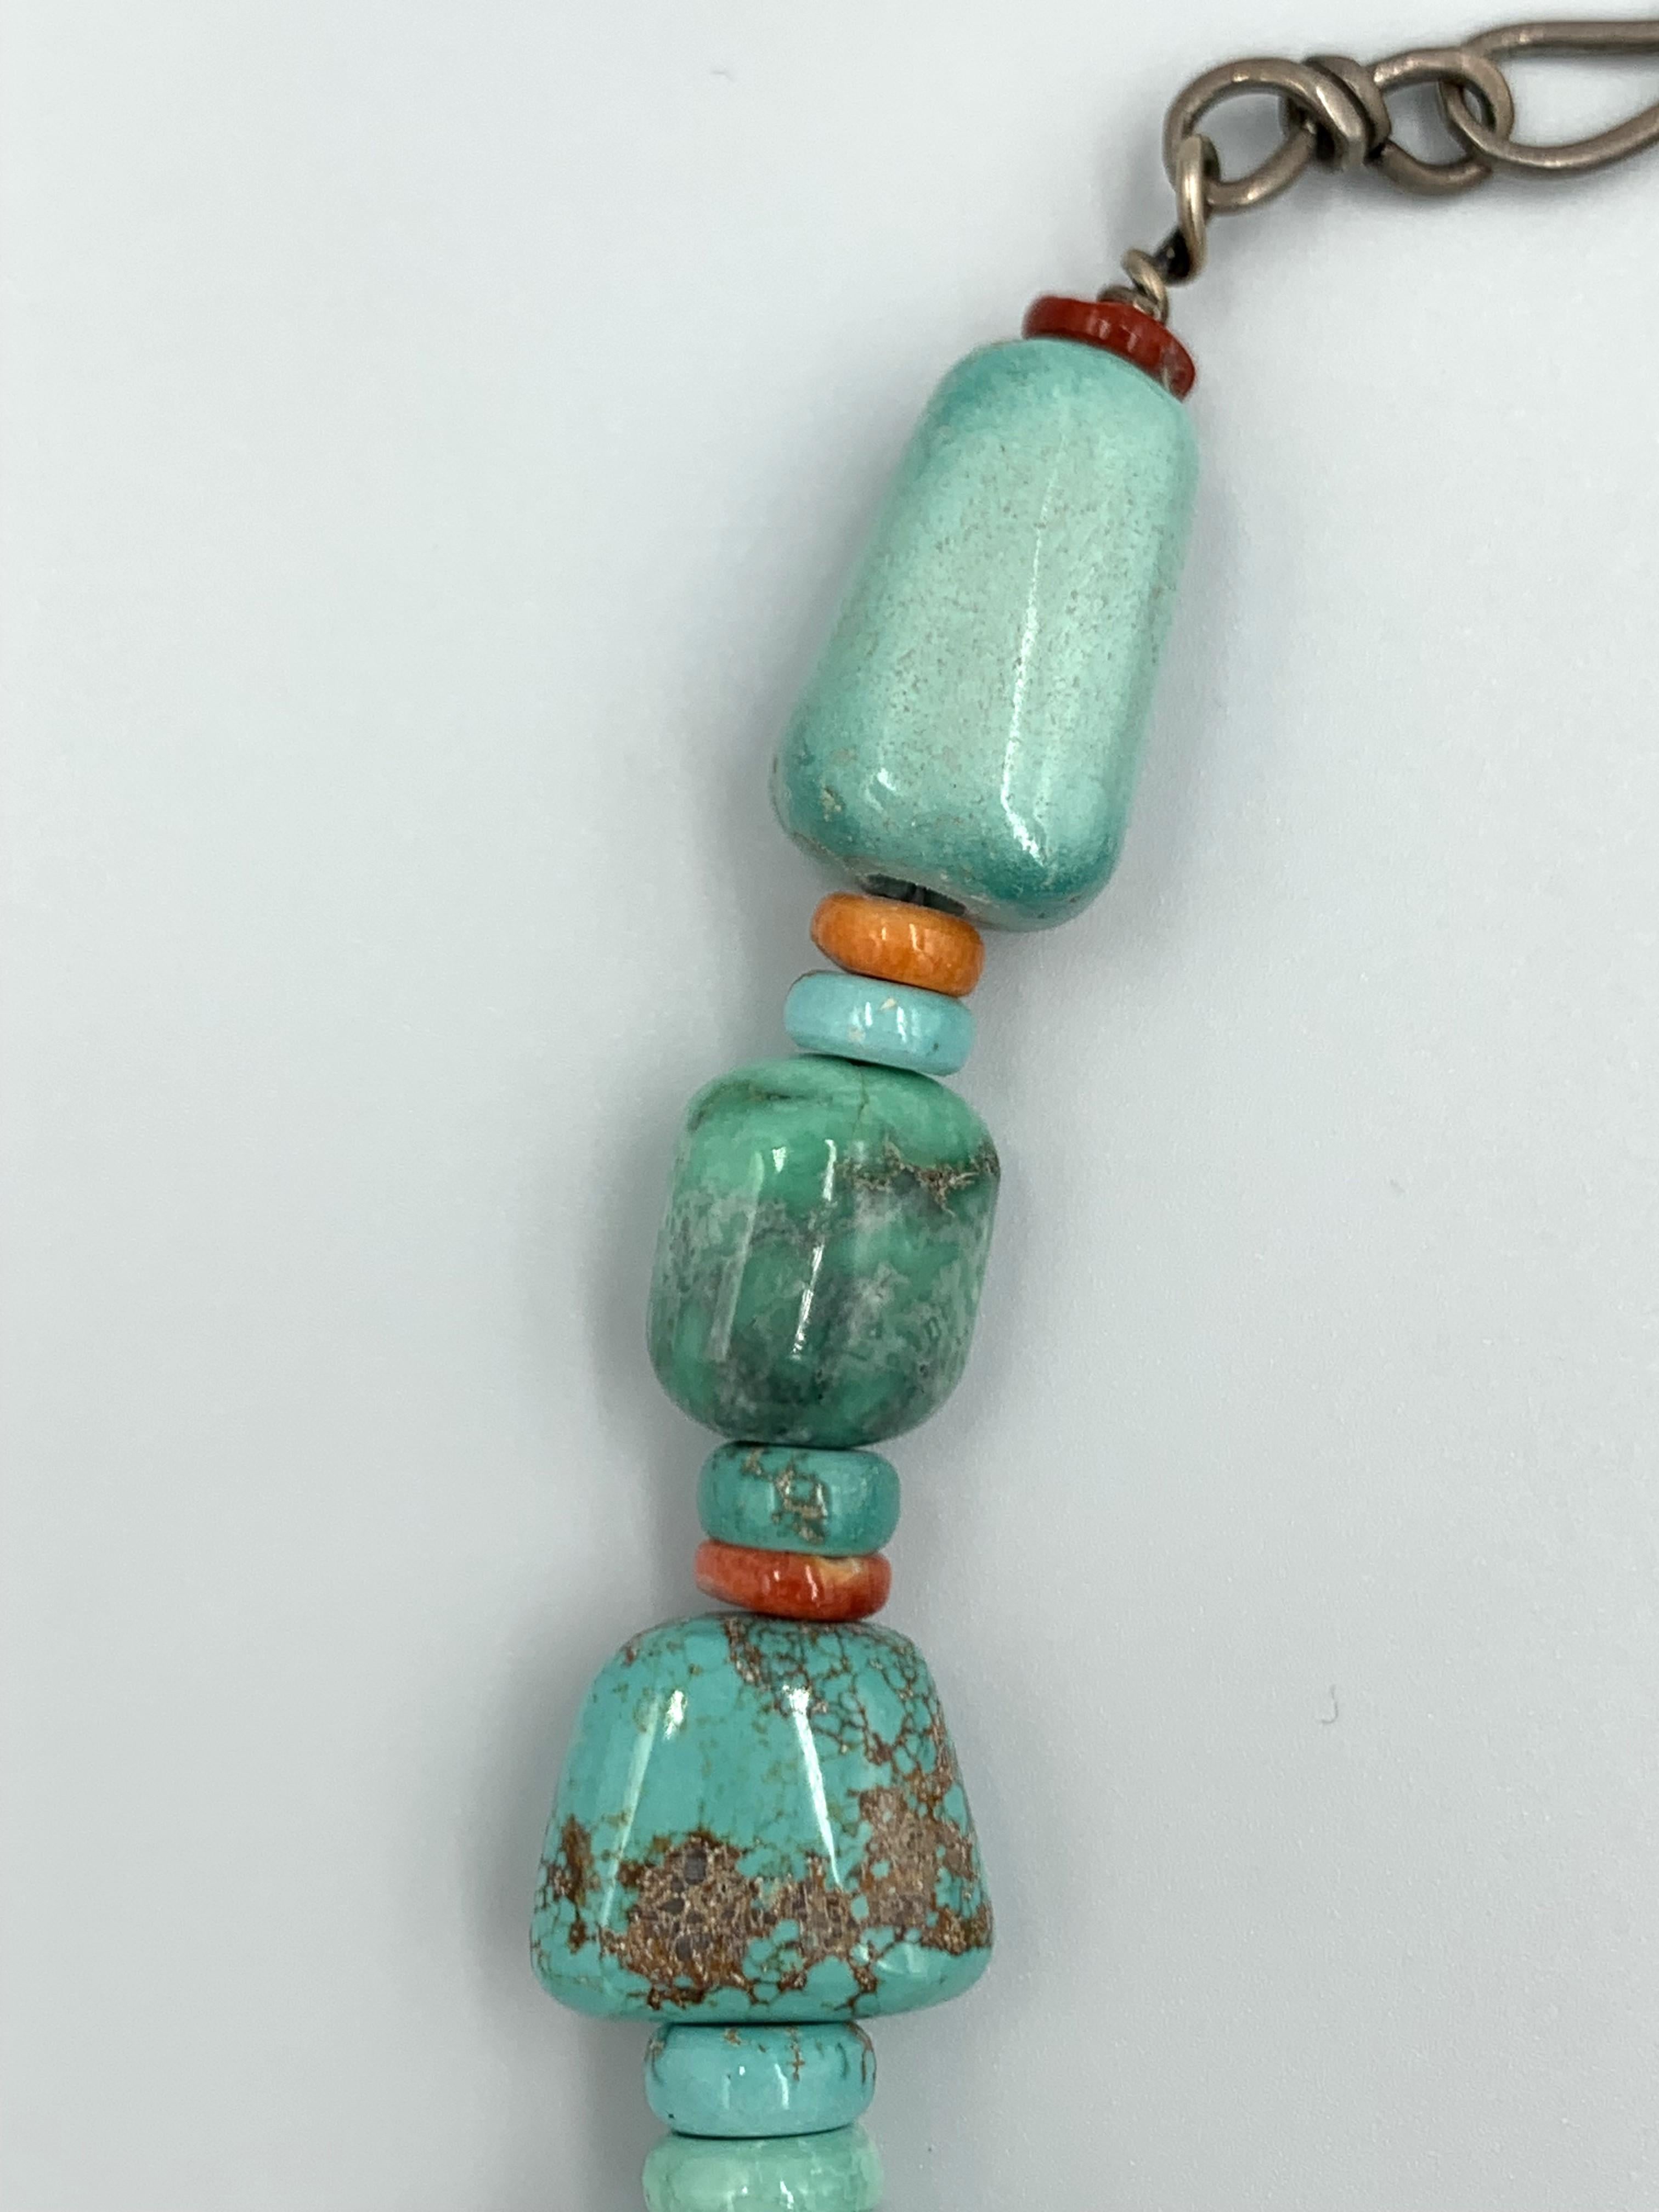 Carico Lake Turquoise Bead Necklace by Bruce Eckhardt In New Condition For Sale In Scottsdale, AZ